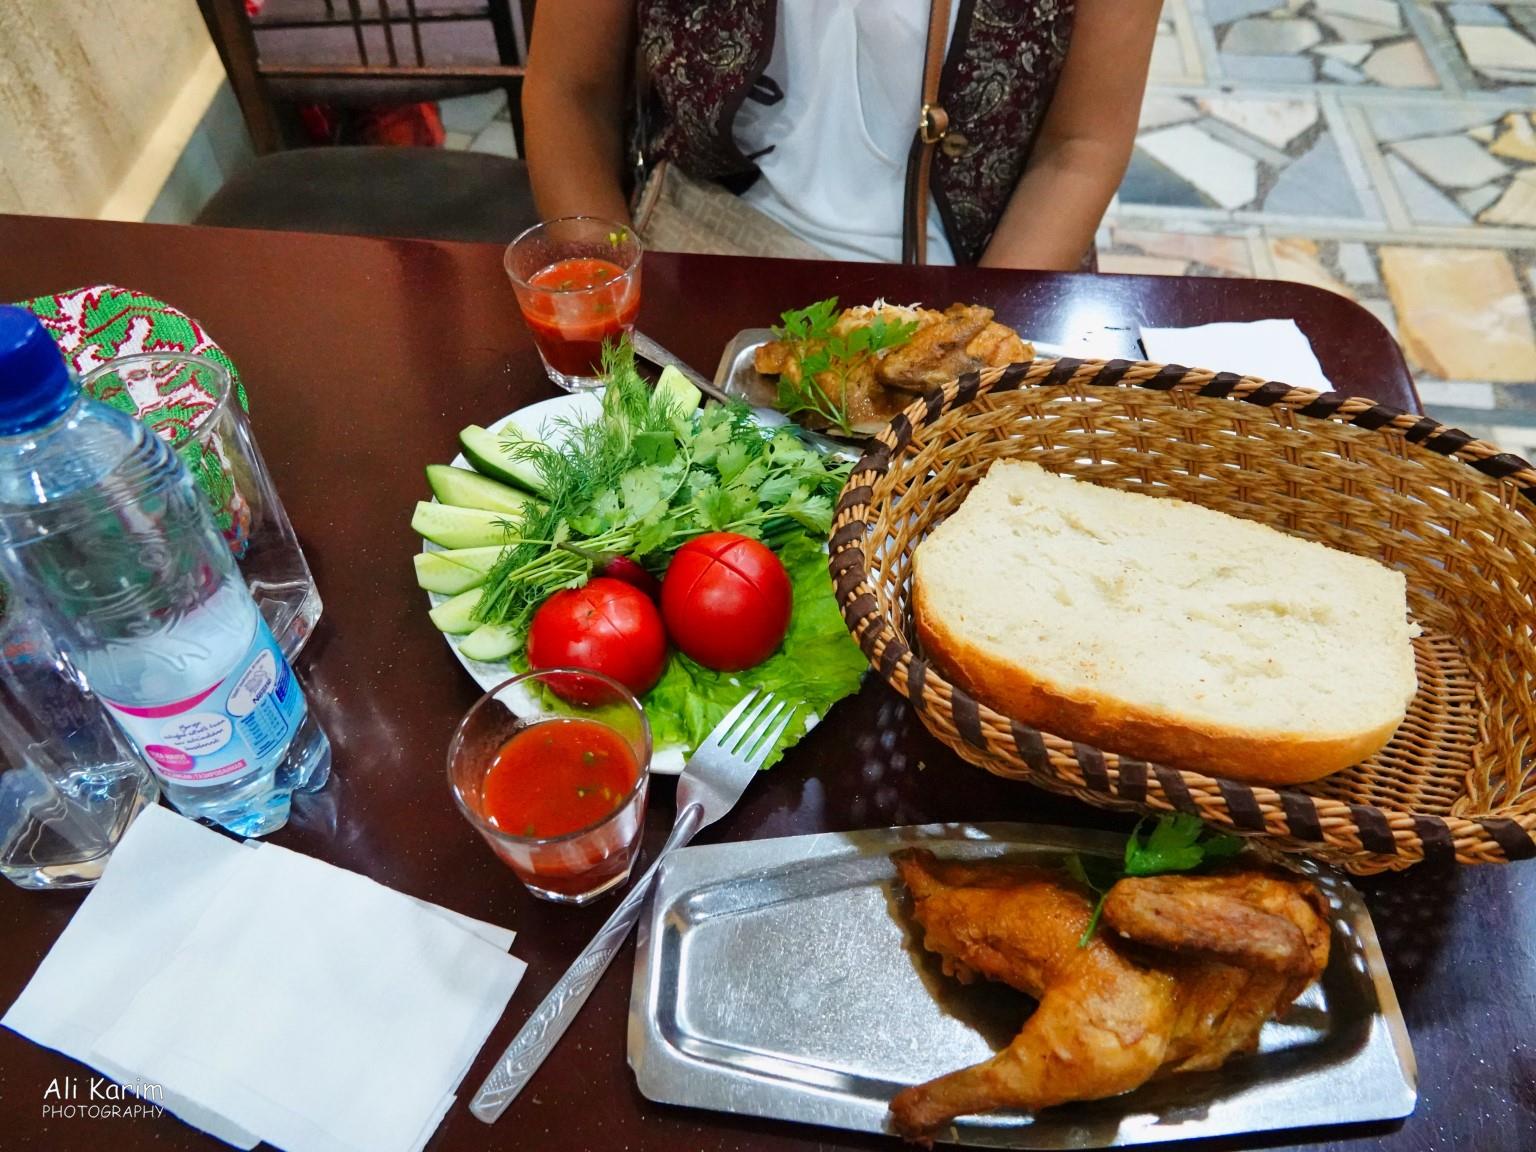 Tashkent, Oct 2019, Dinner at the Chicken place recommended by Khoumayoun and Sharada. Cost was $5 for this two chicken dinner pictured.